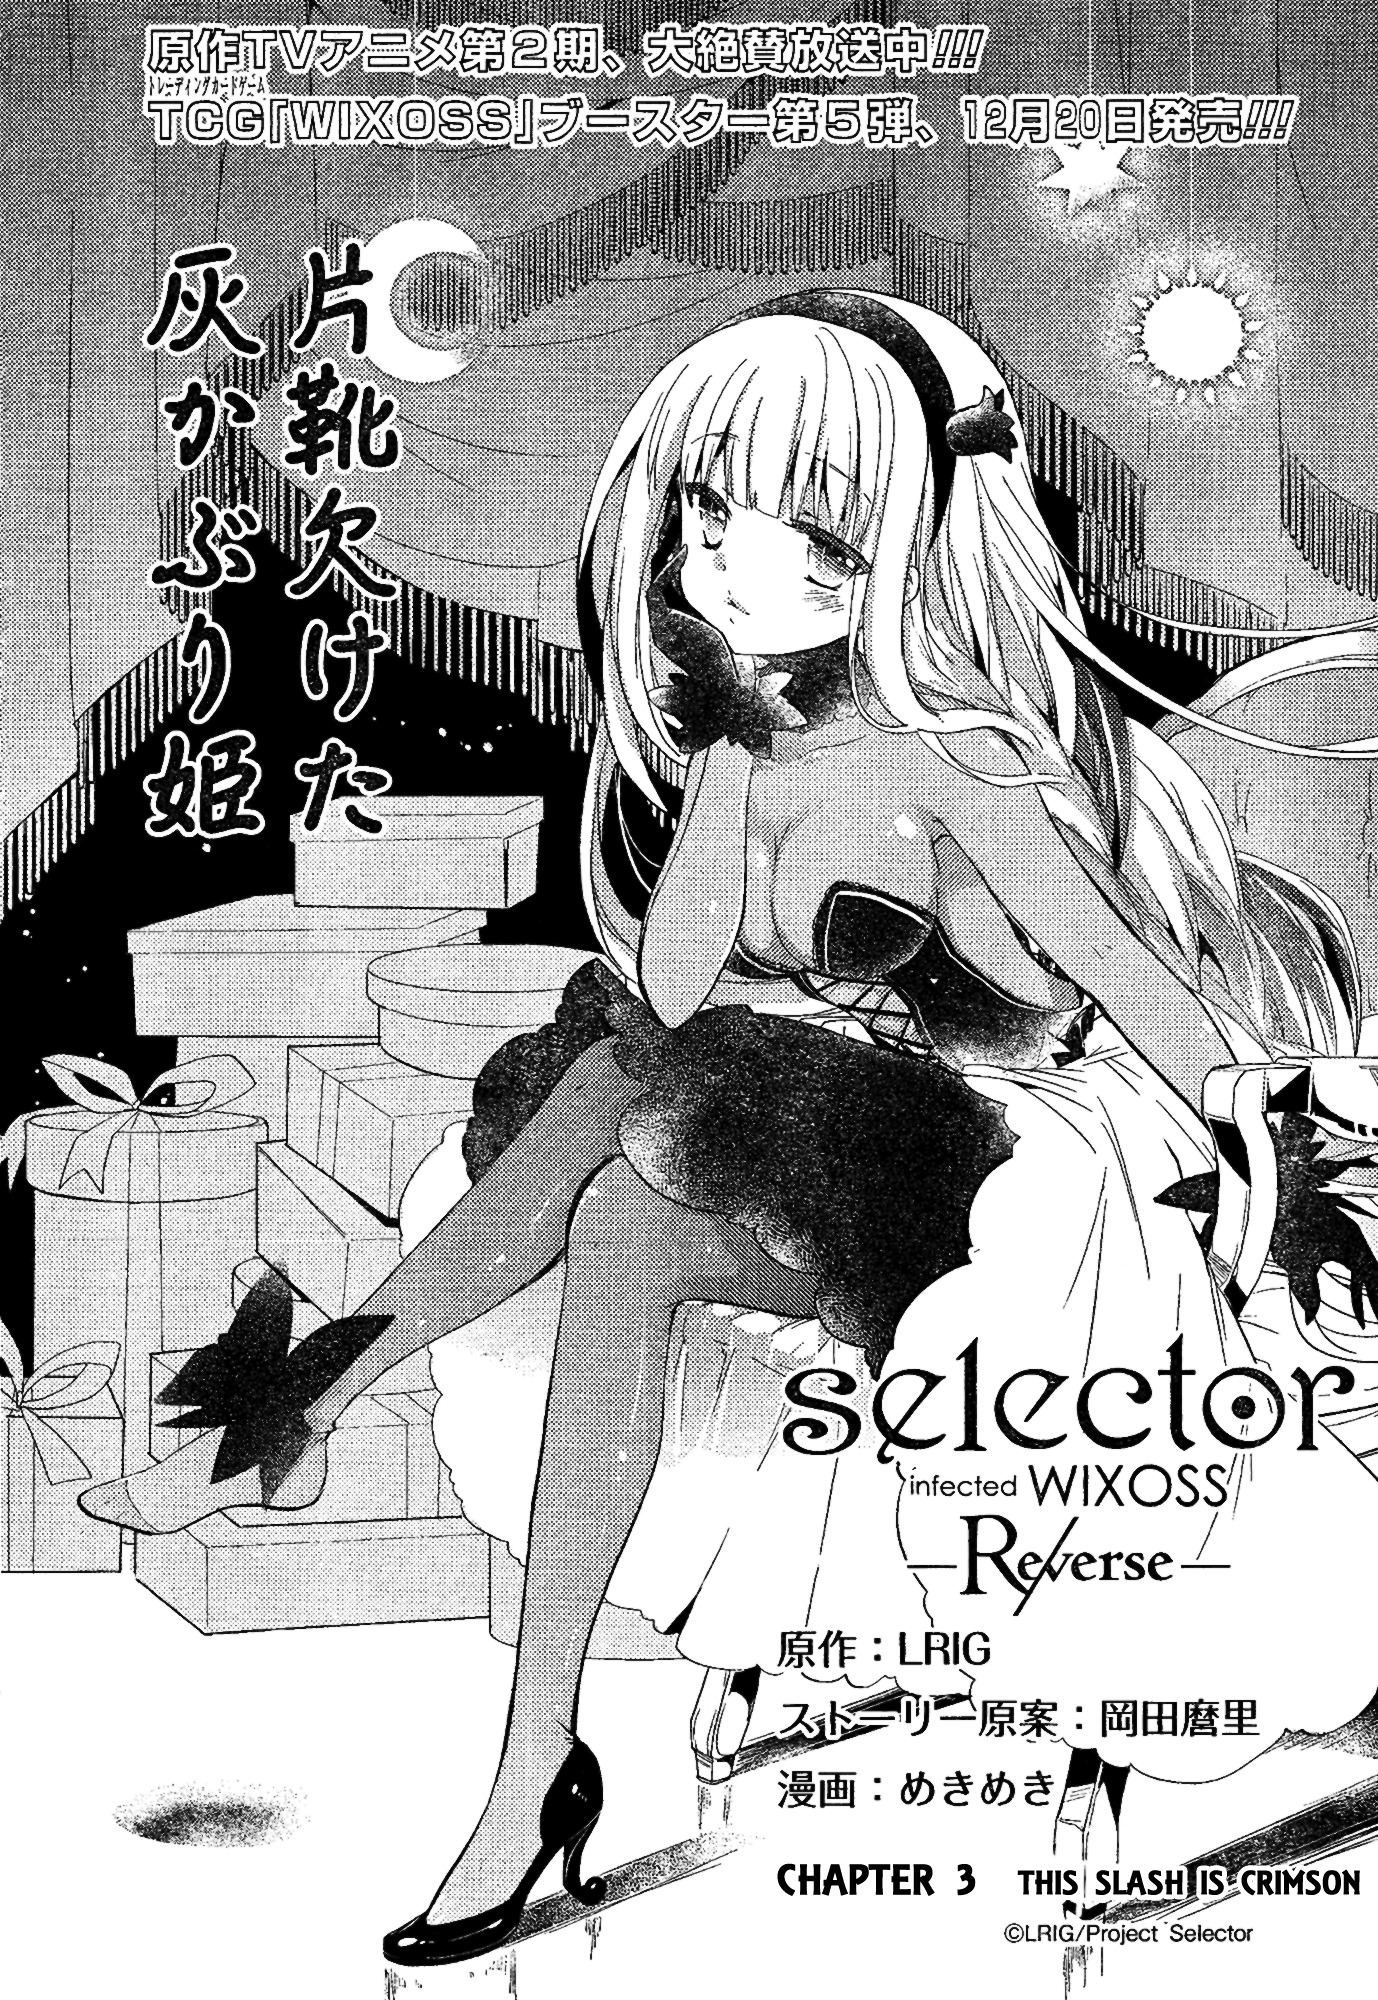 Selector Infected Wixoss - Re/verse - Chapter 3 #2